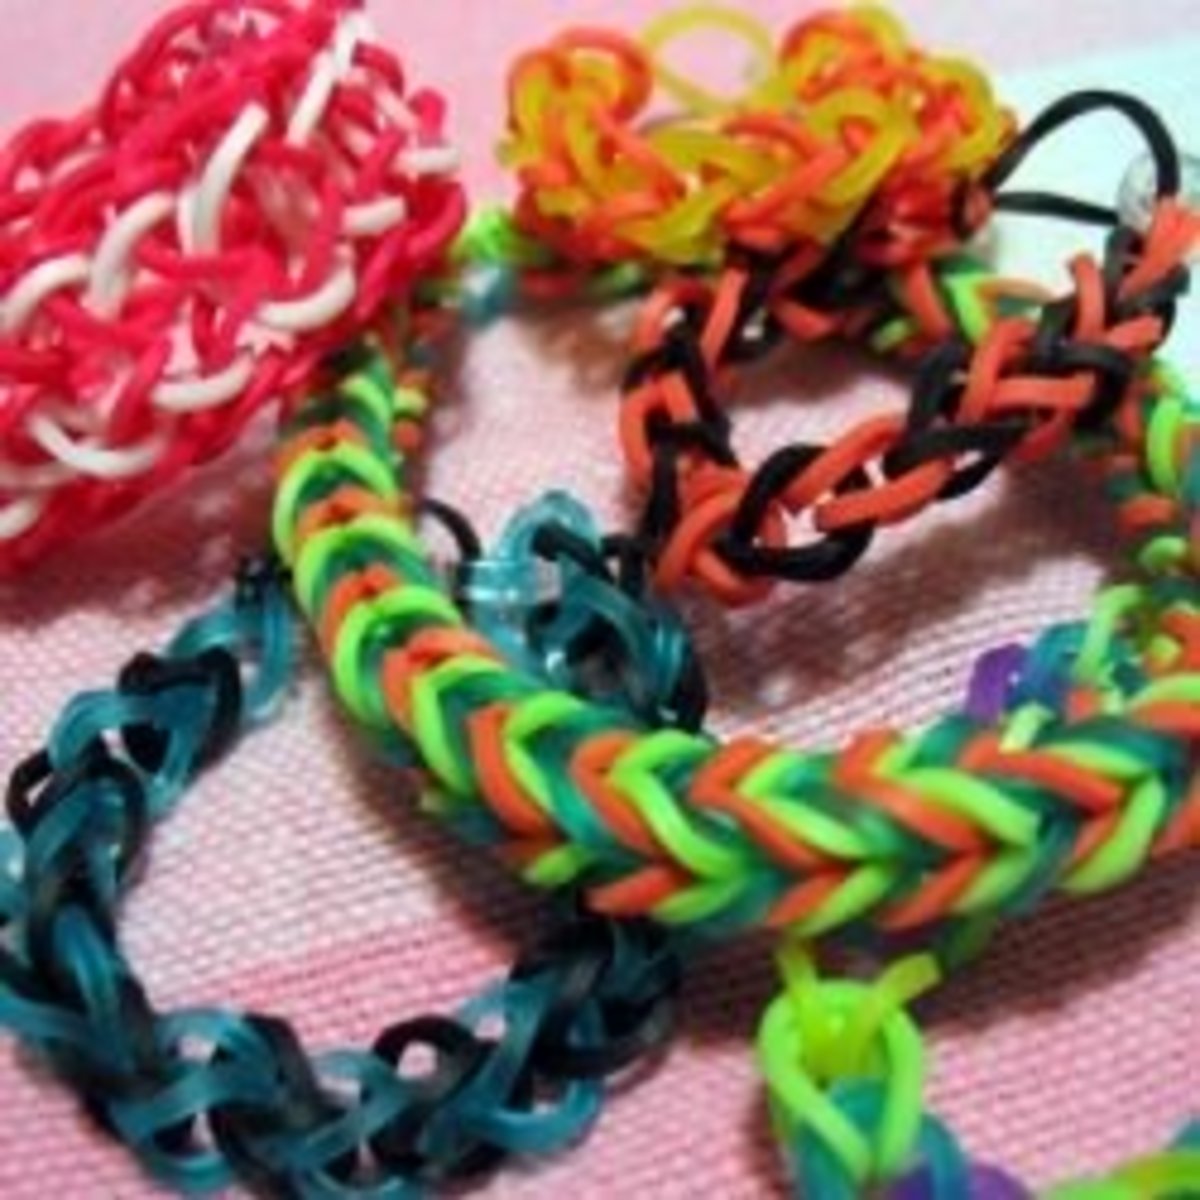 How to Make Rubber Band Bracelets - Without the Loom!